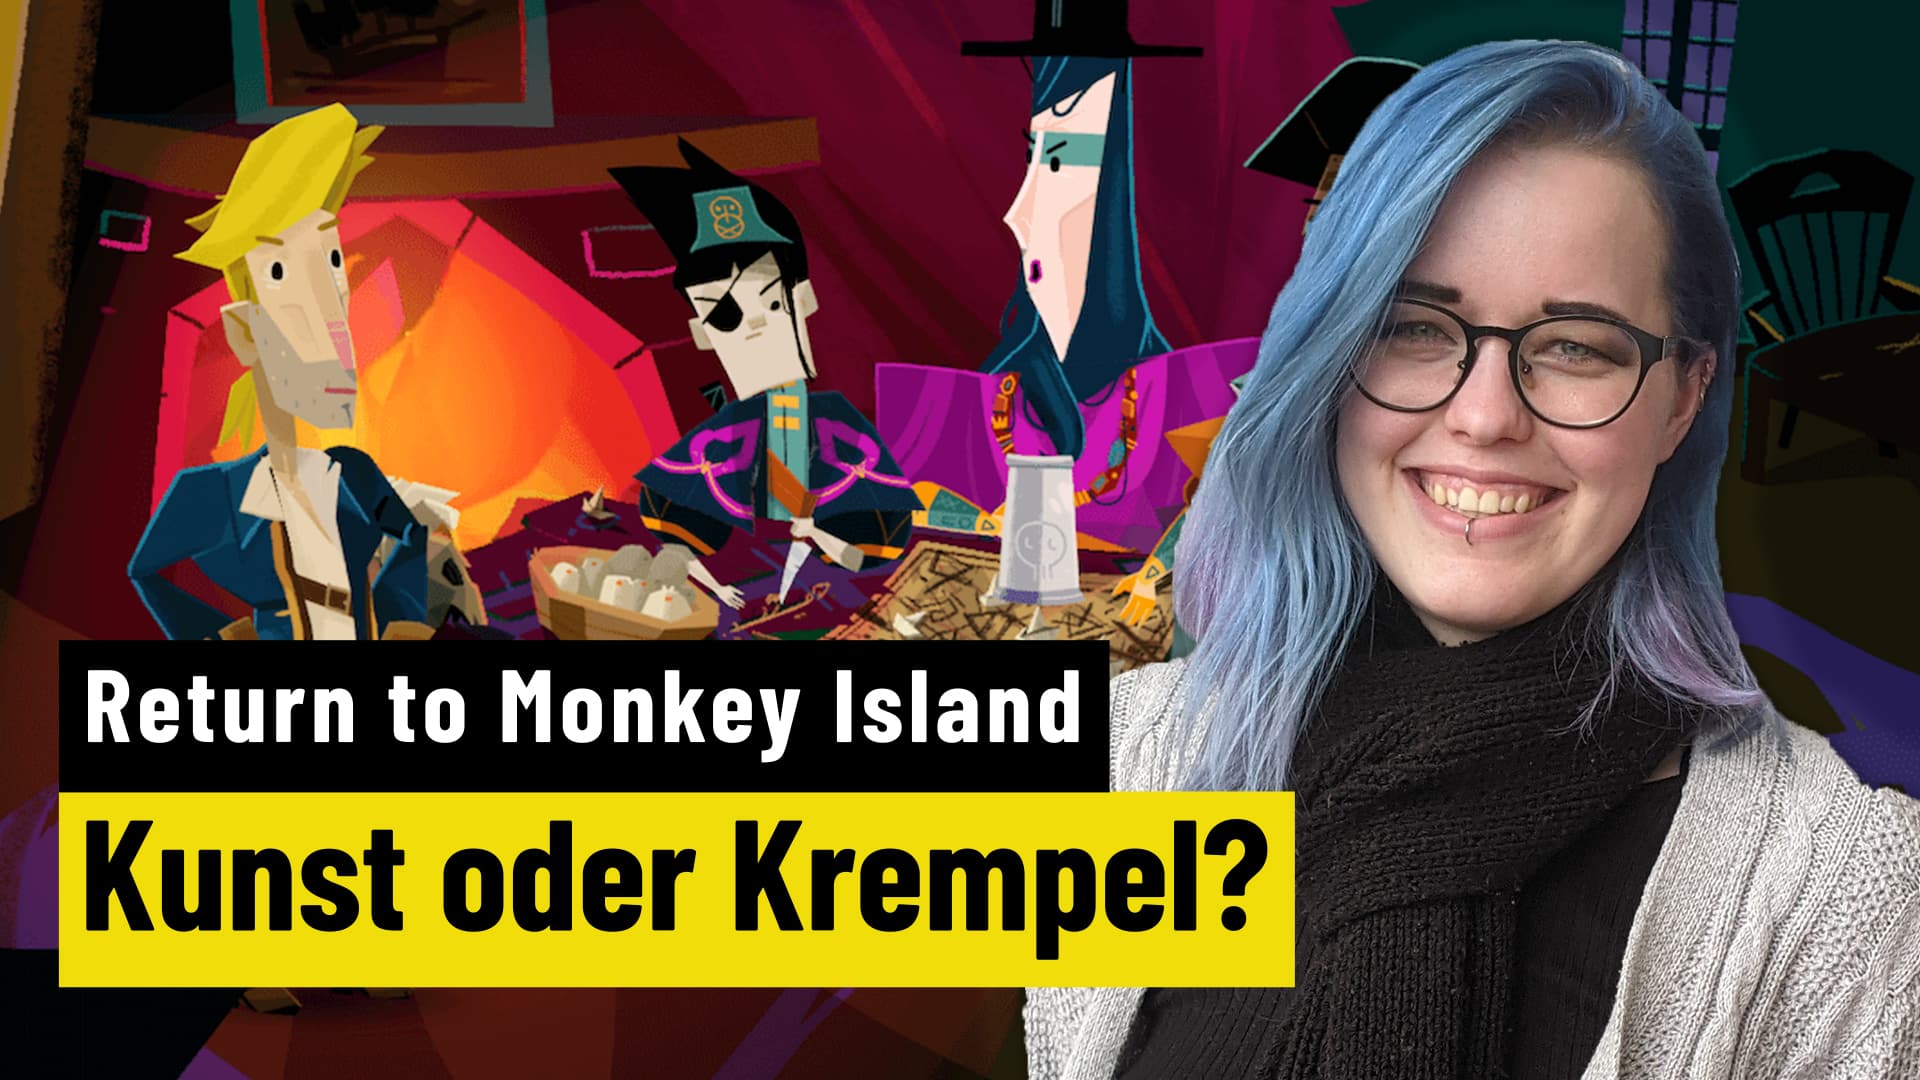 Graphics Crisis Monkey Island |  OPINION |  Are games art or a service product?